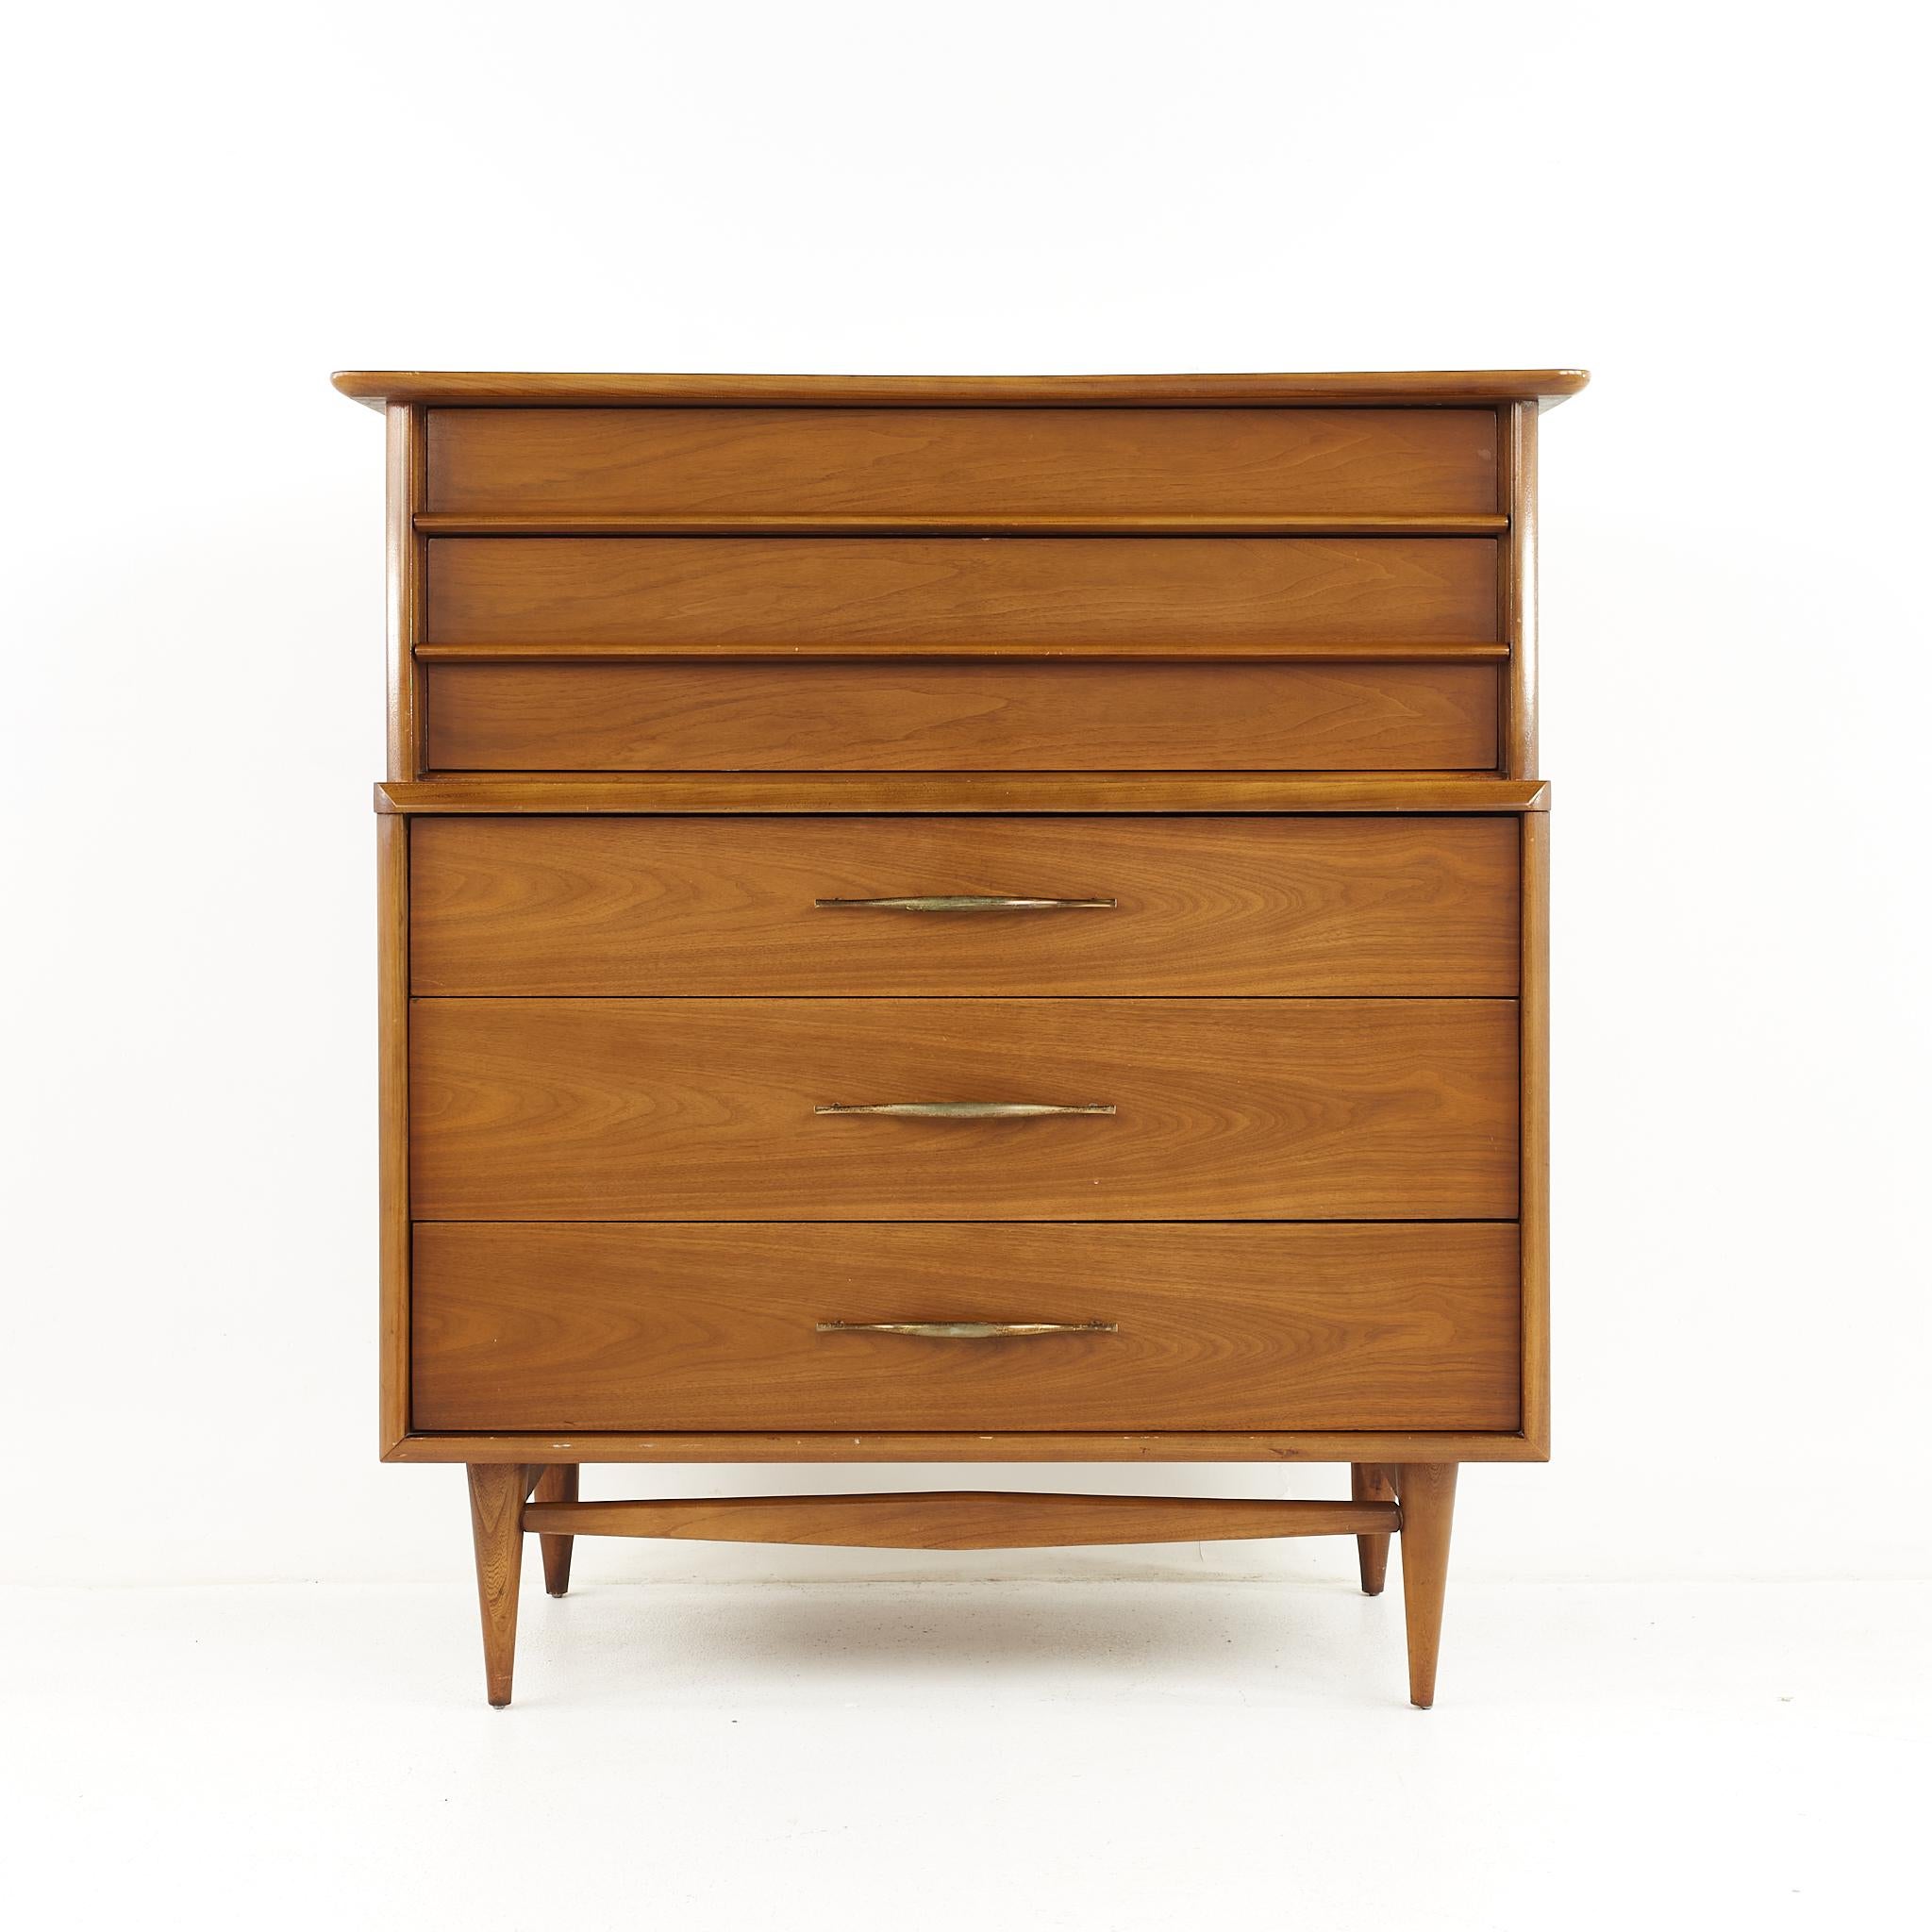 Kent Coffey Foreteller mid century walnut highboy dresser.

The dresser measures: 42 wide x 20 deep x 44.75 inches high.

All pieces of furniture can be had in what we call restored vintage condition. That means the piece is restored upon